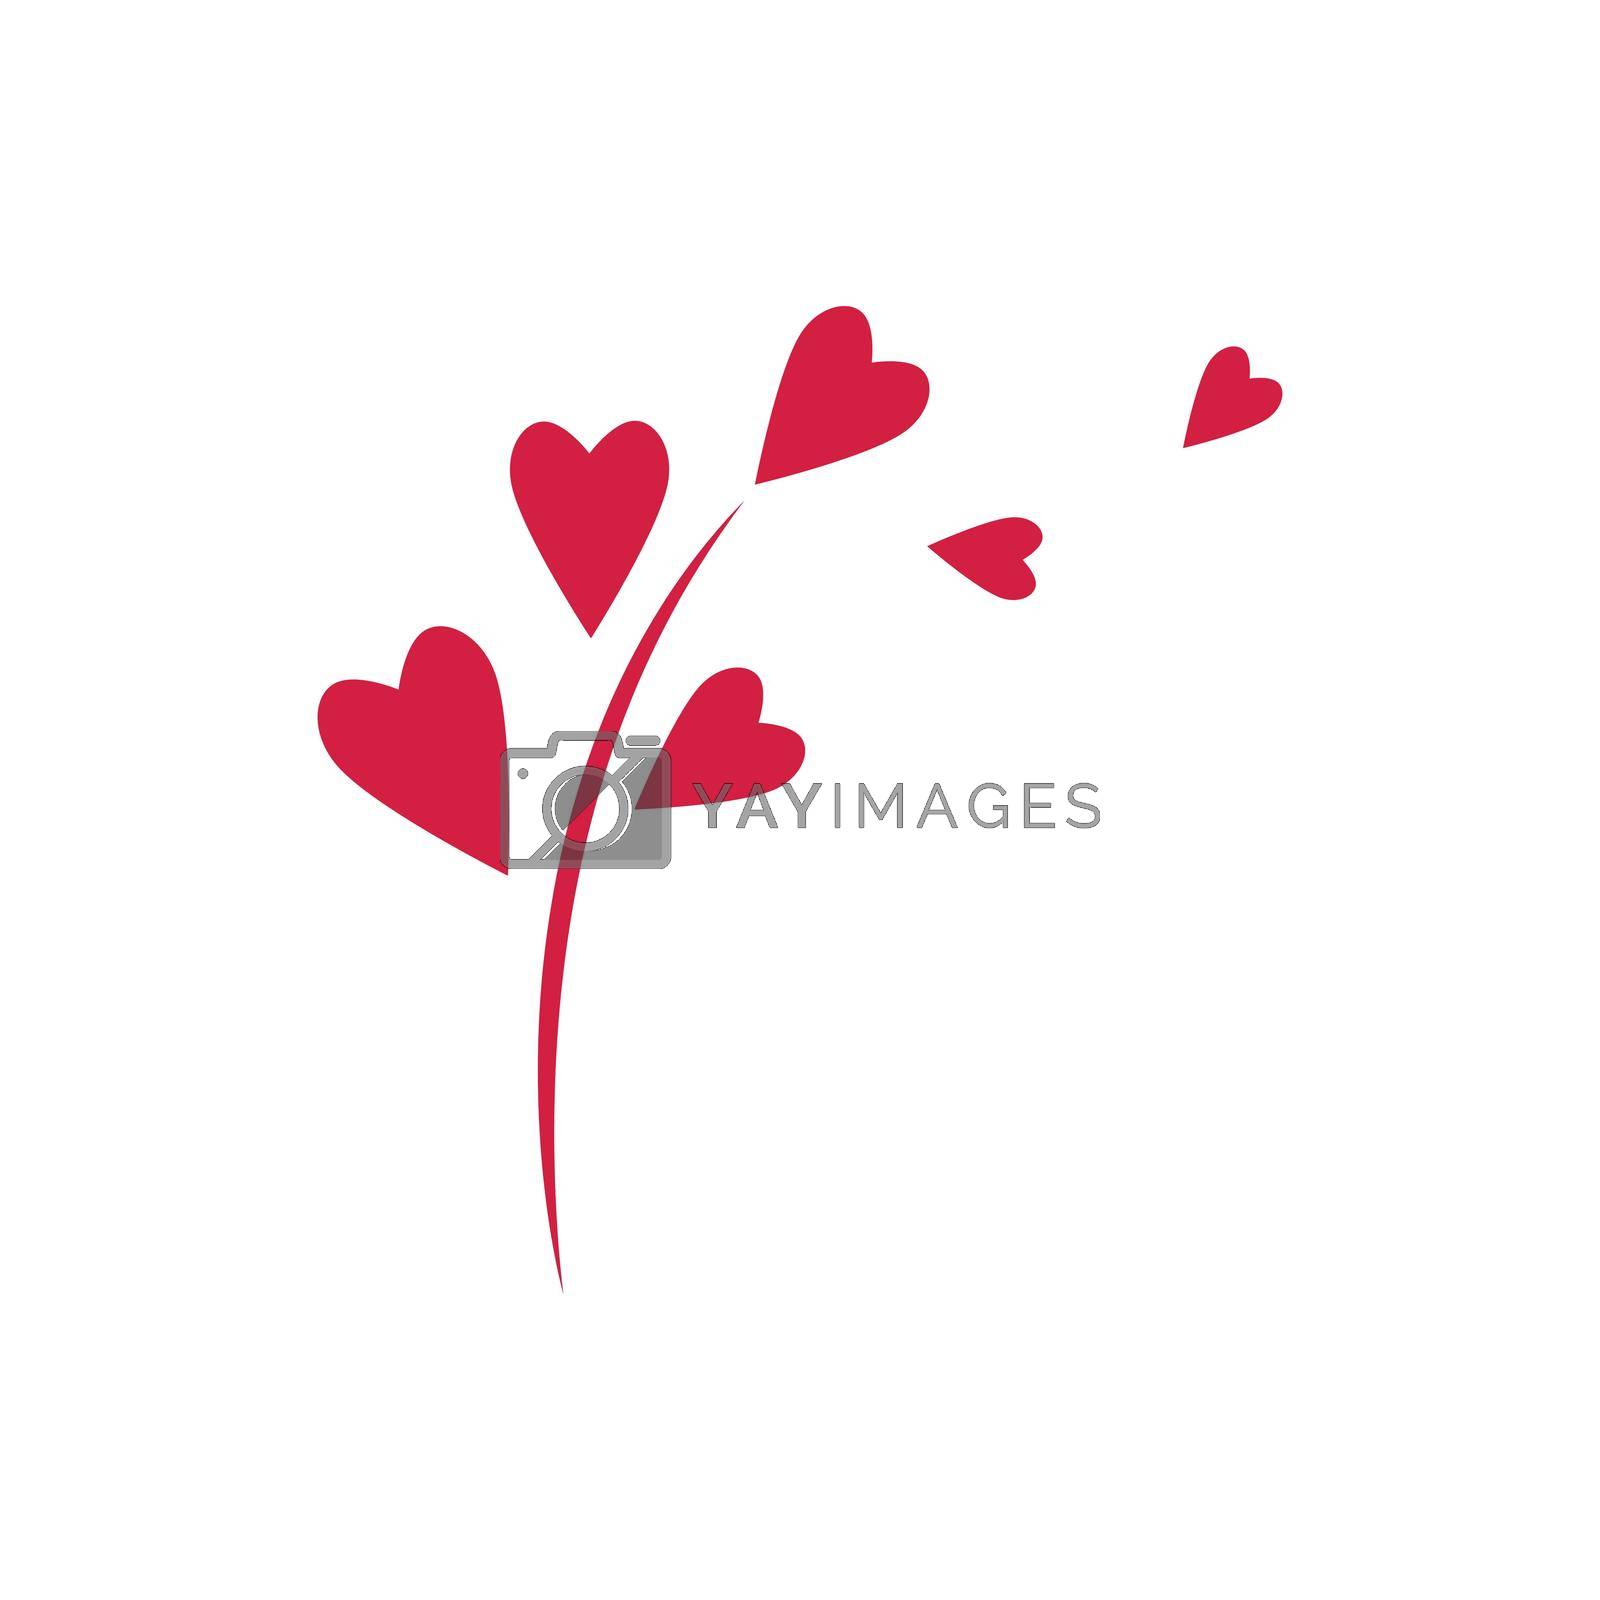 Royalty free image of Love logo vector illustration by awk